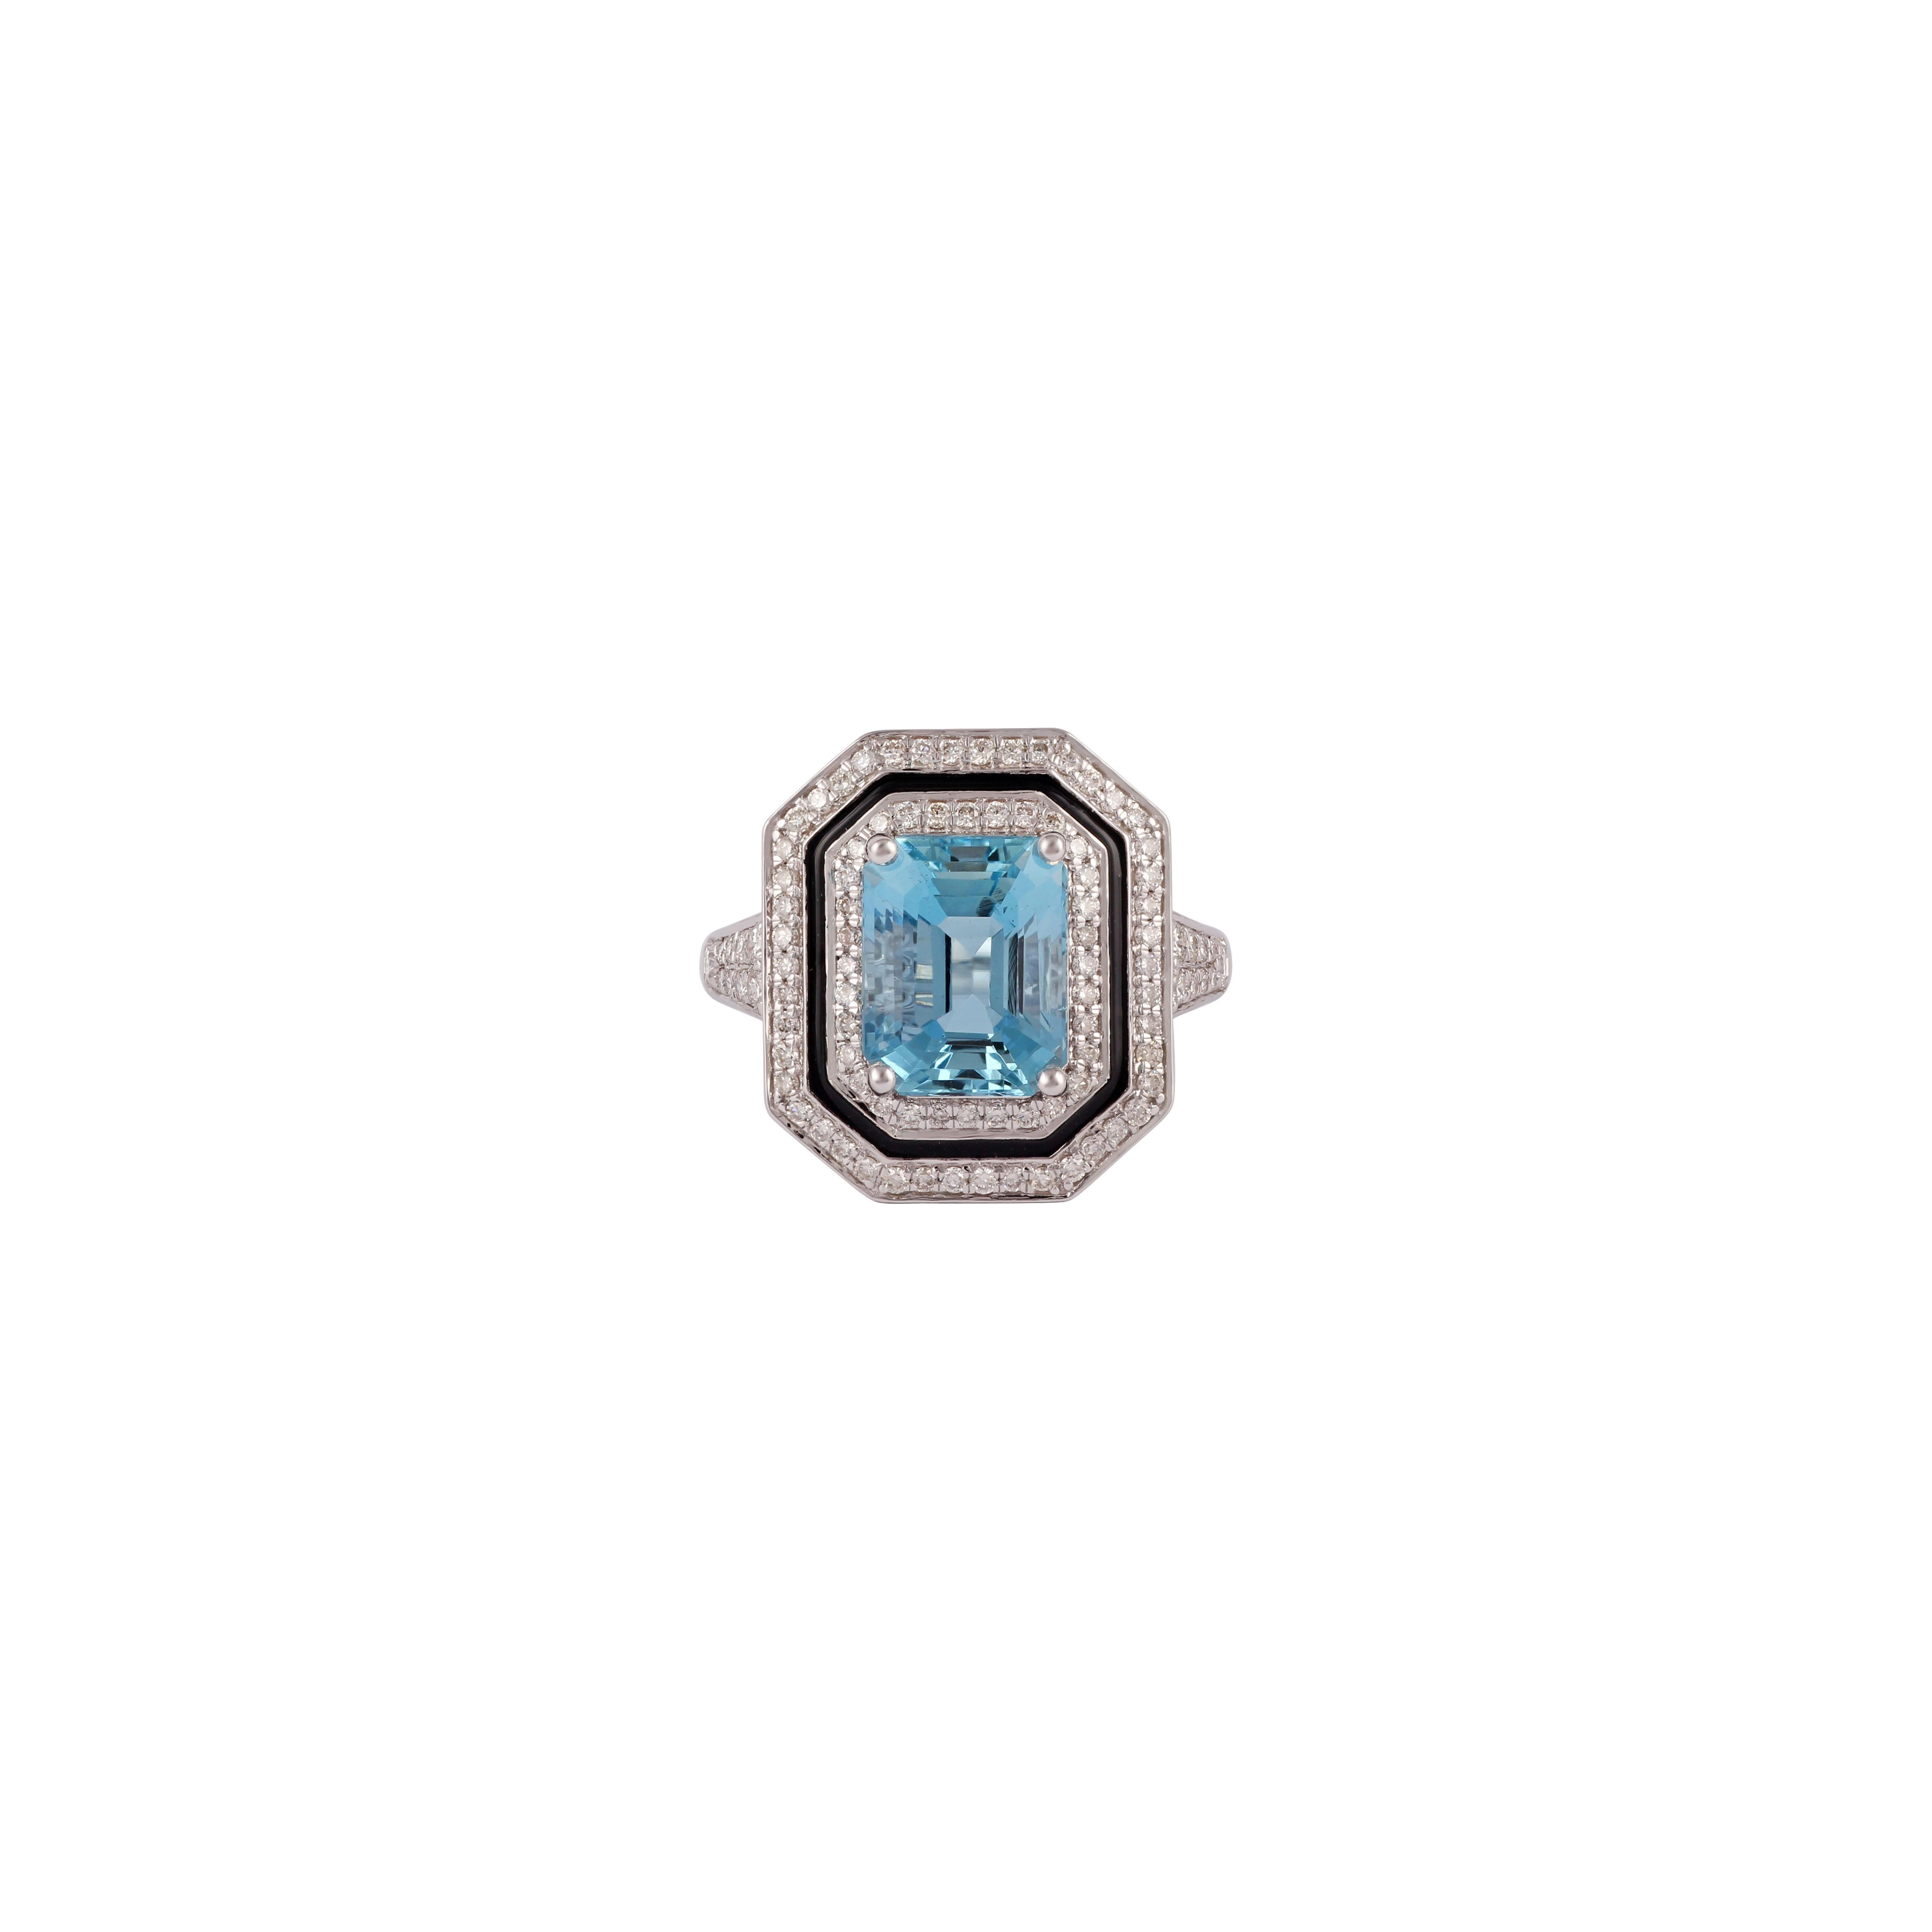 Its an exclusive ring studded in 18k white gold with black enamel around this ring contain 1 piece octagon shaped aquamarine weight 3.01 carat & 96 pieces round shaped diamond weight 0.58 carat this entire ring studded in 18k white gold weight 5.99